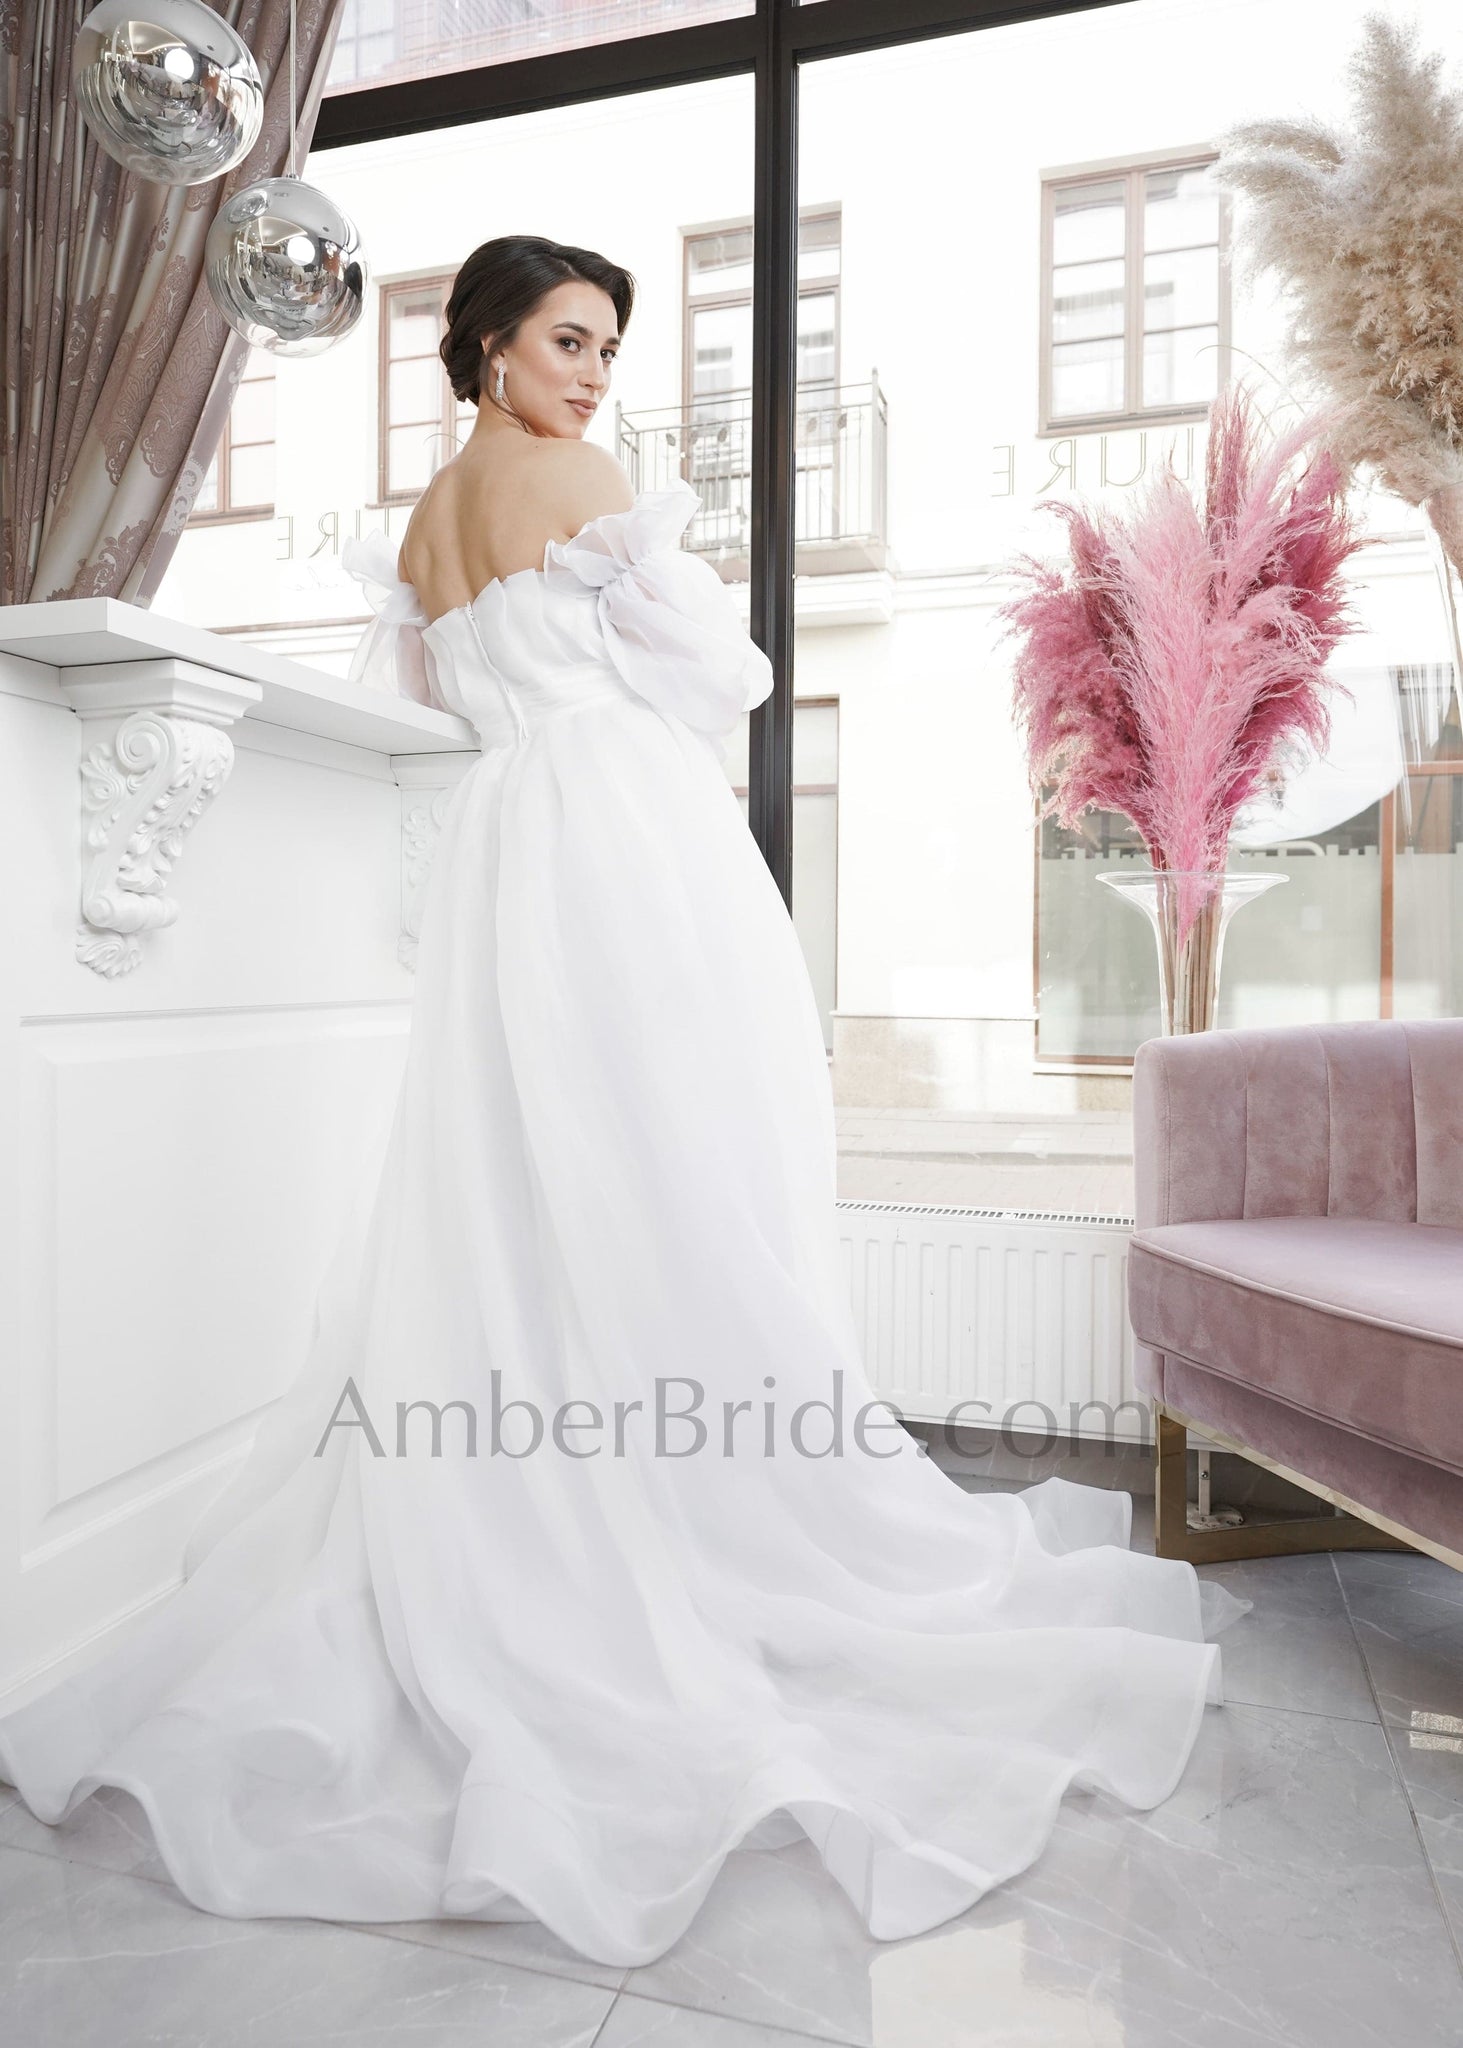 Exclusive A Line Strapless Attachable Sleeve Organza Wedding Dress - AmberBride